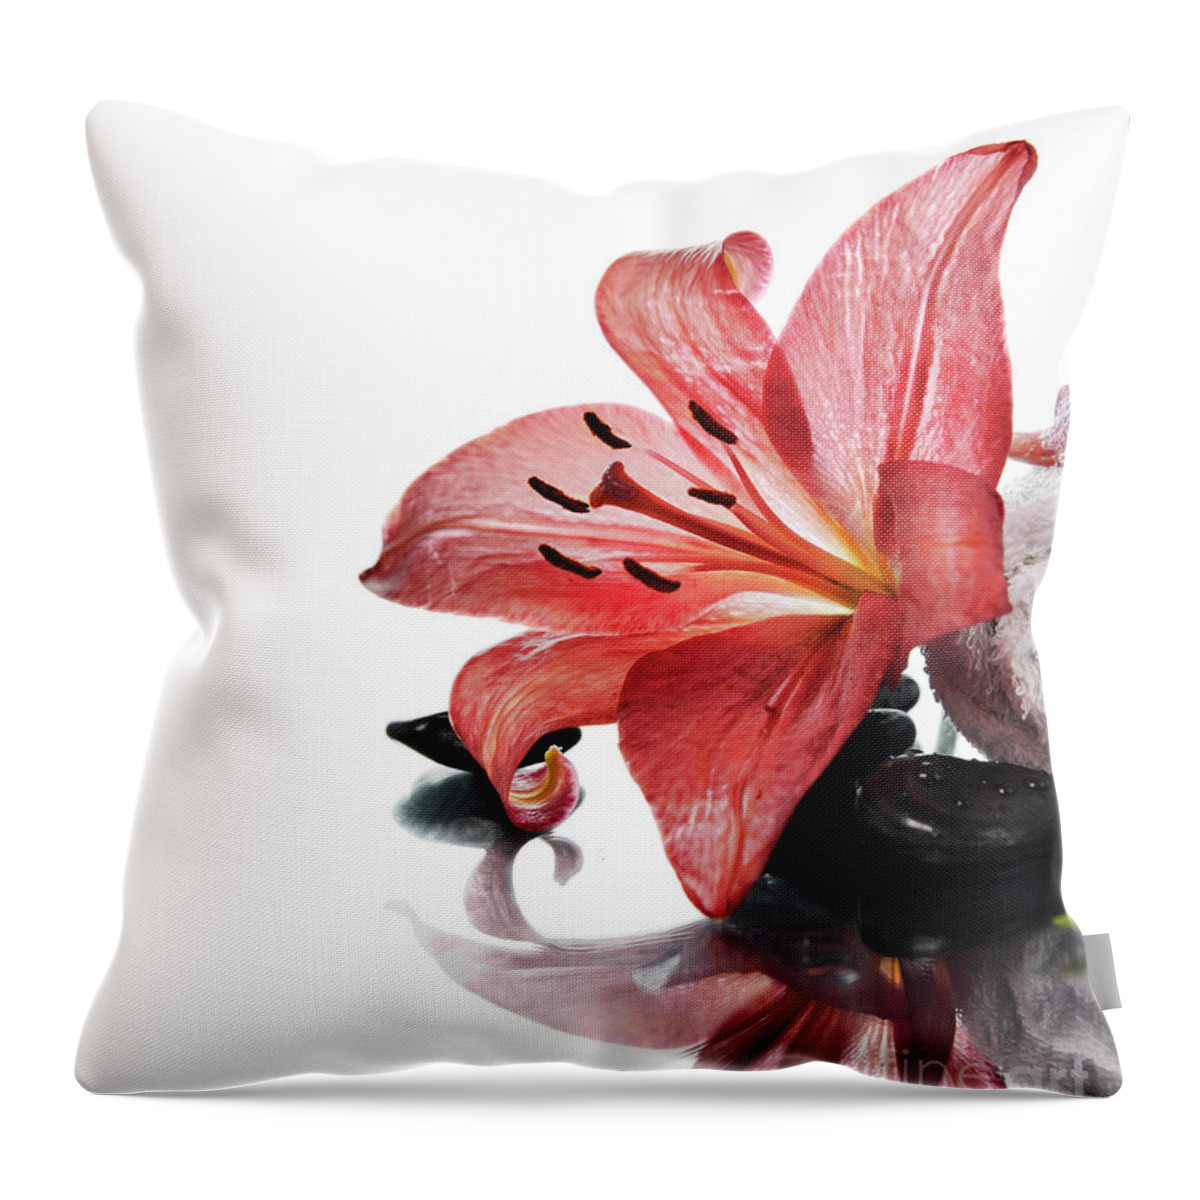 Spa Throw Pillow featuring the photograph Spa Concept #2 by Jelena Jovanovic